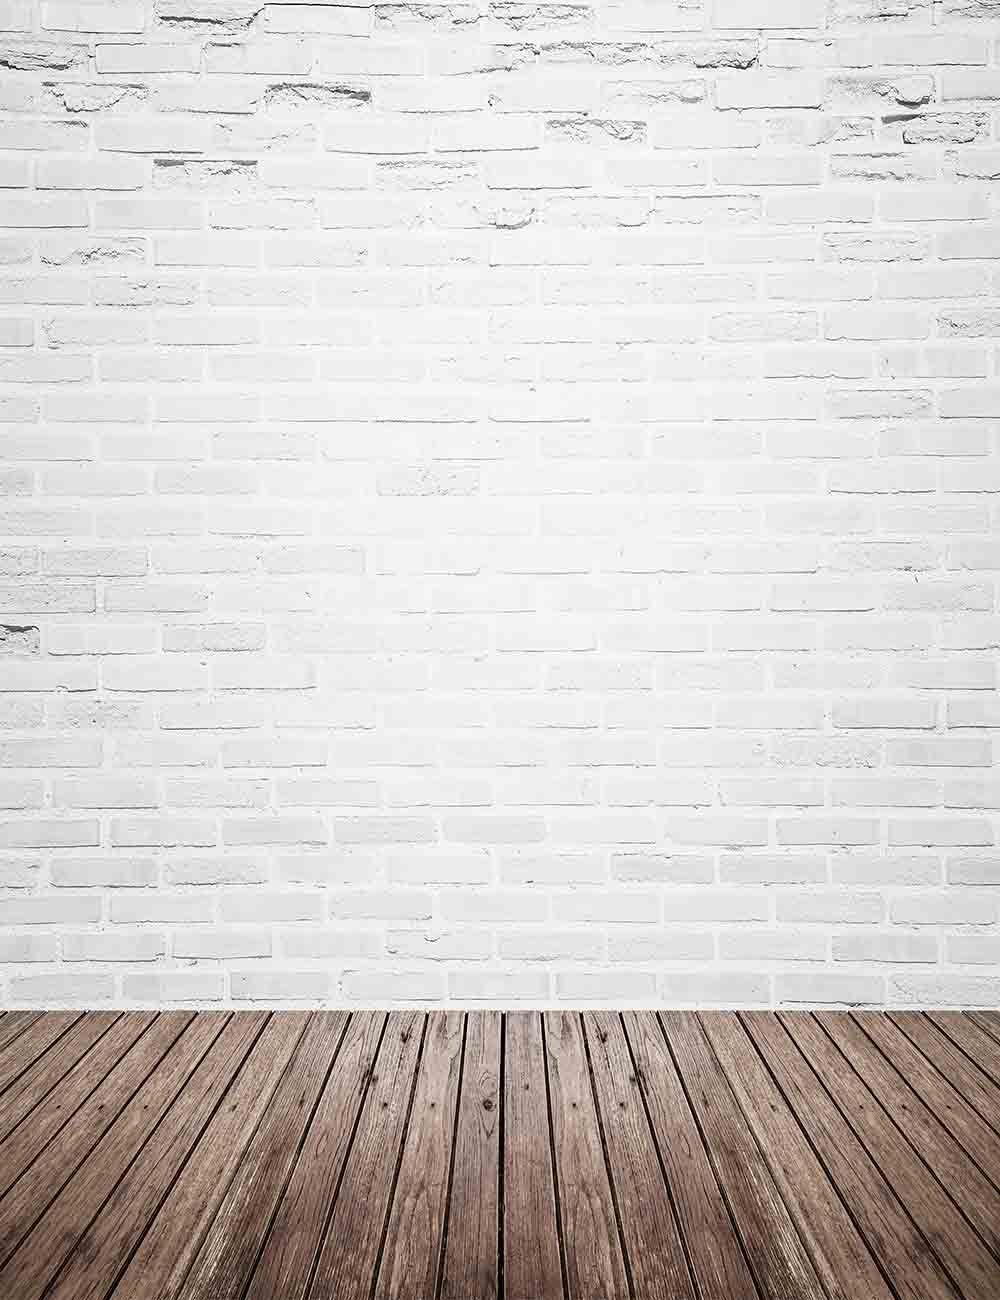 Retro White Brick Wall With Wood Floor Mat Texture Backdrop For Photography Q-0130 Shopbackdrop